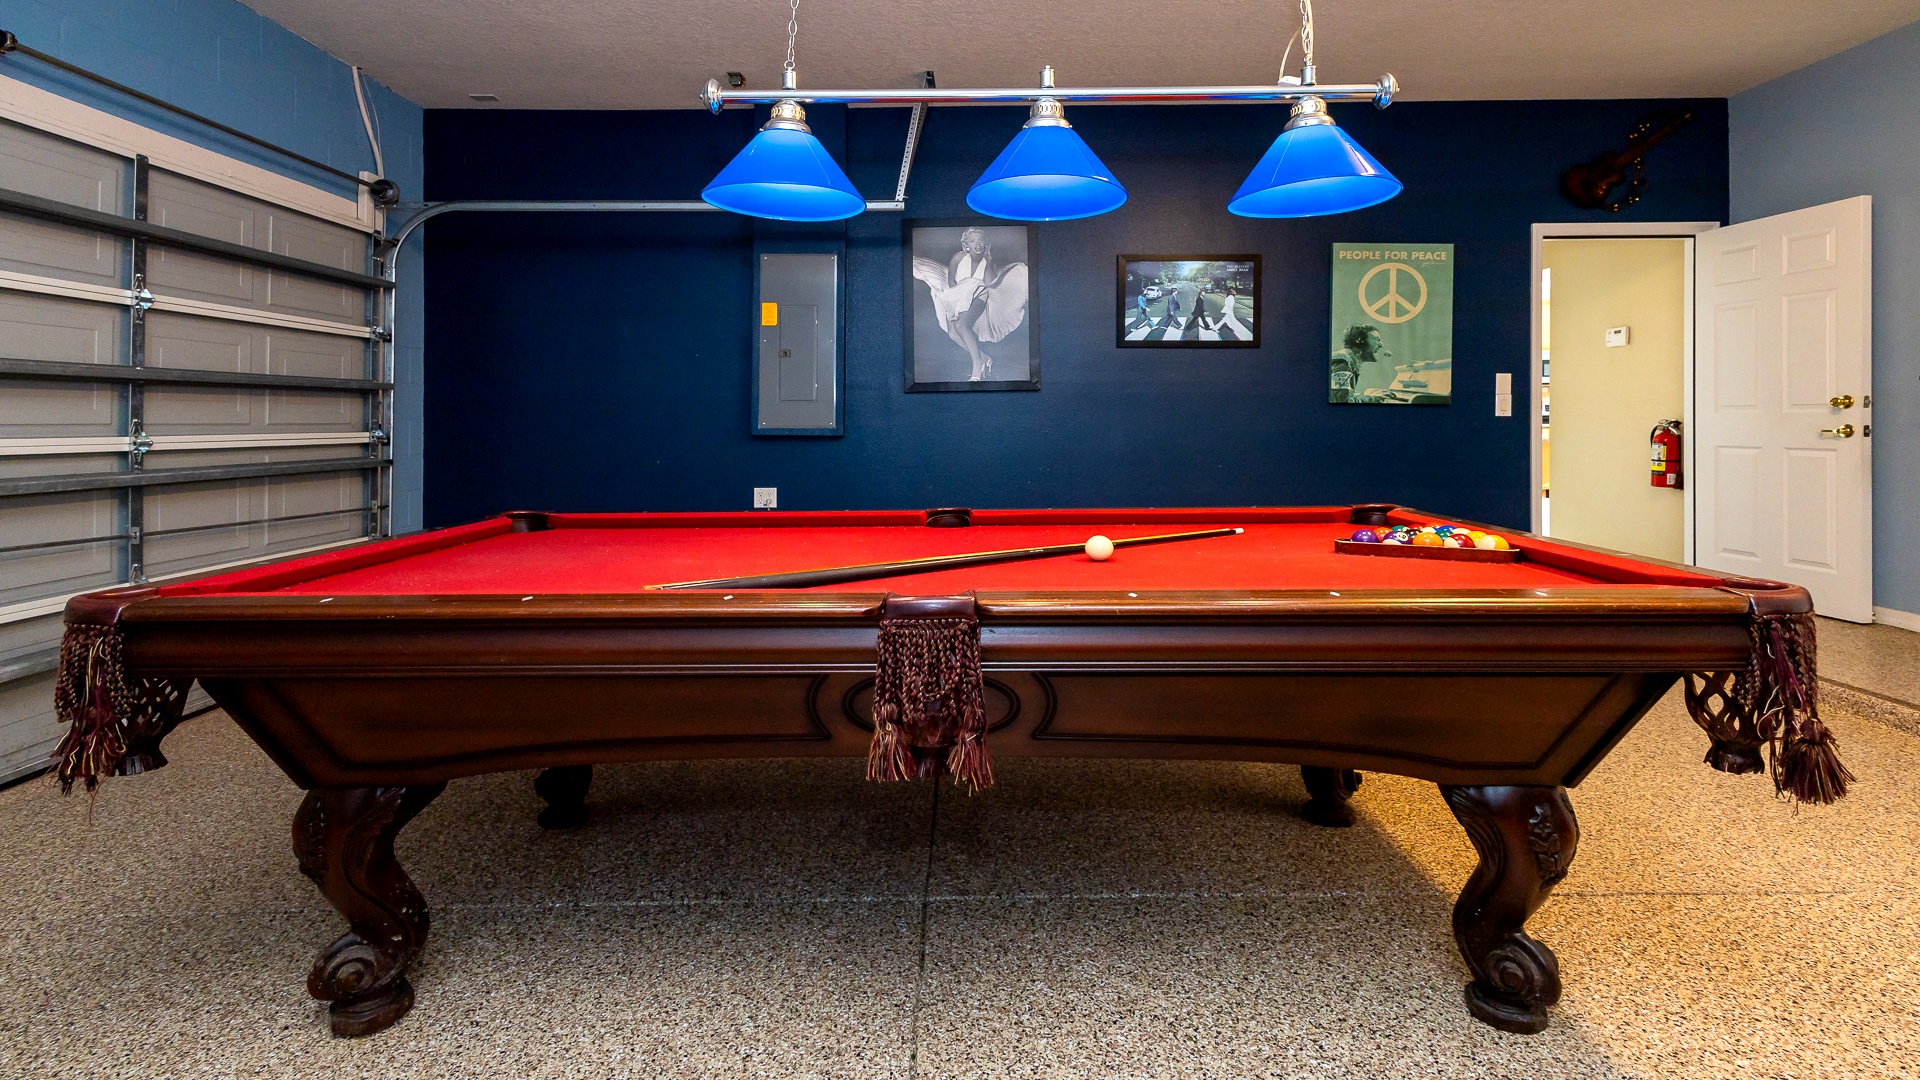 For competitive evenings, head to the garage game room for pool or foosball